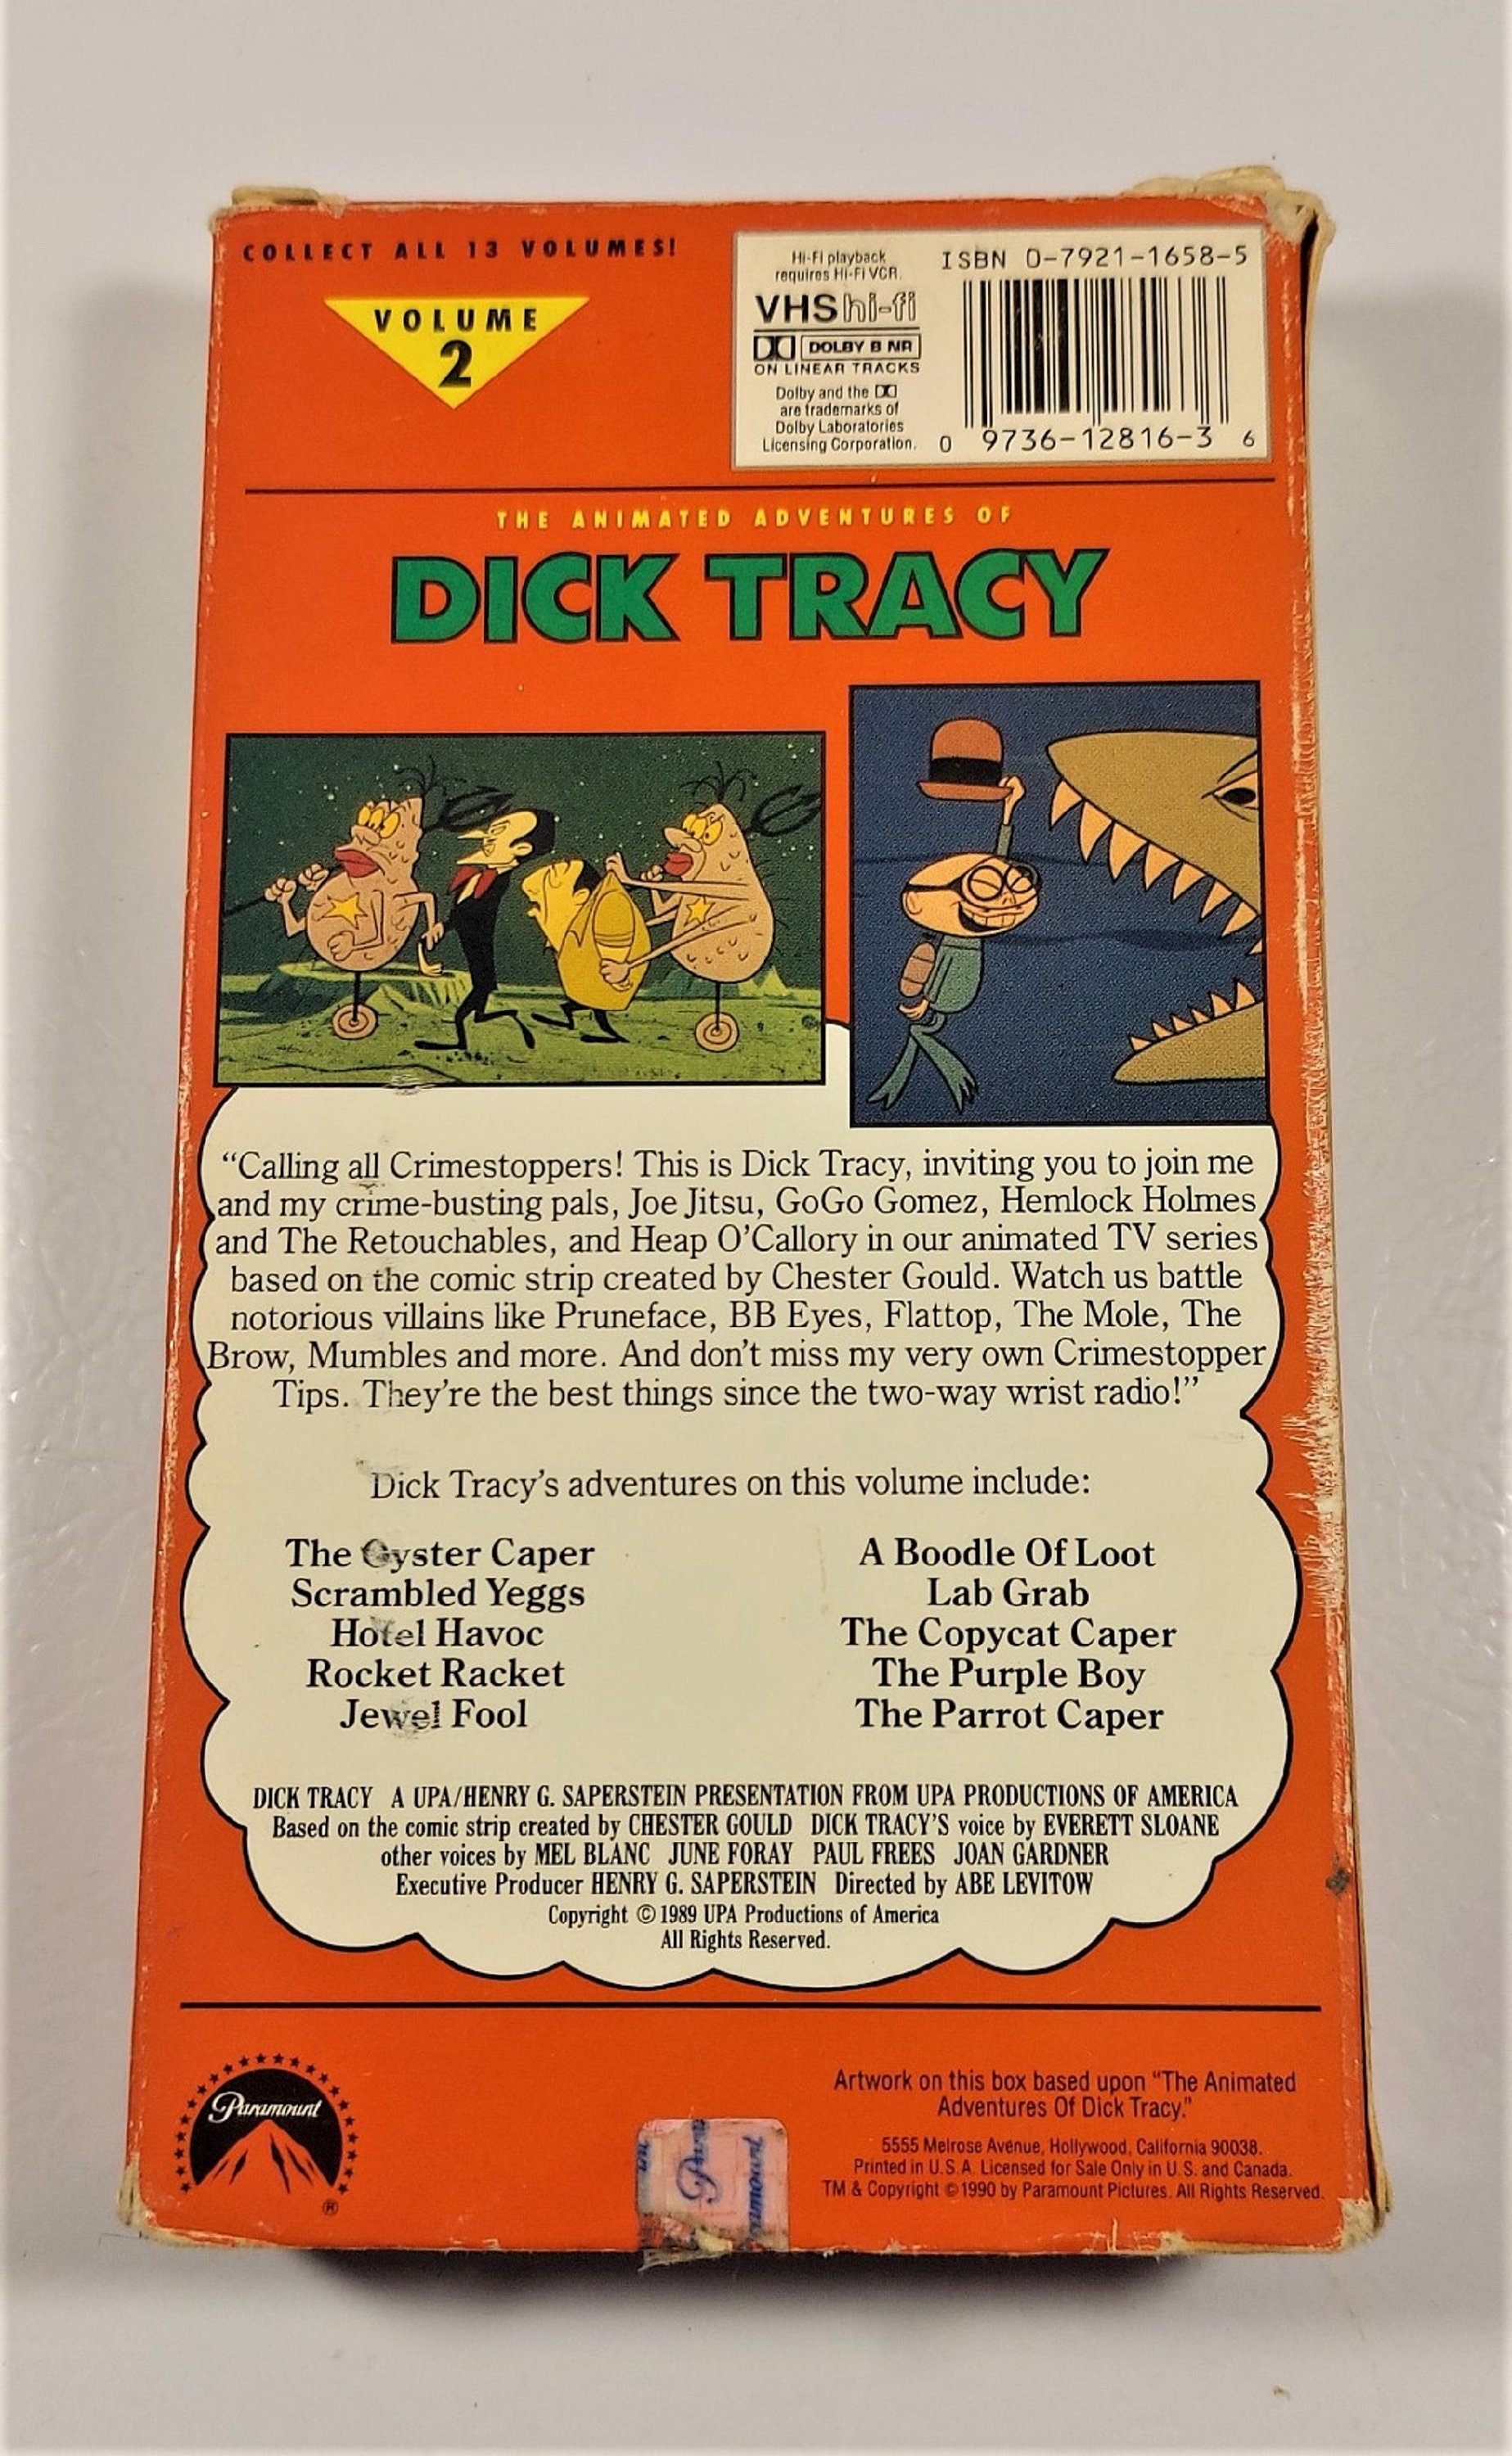 The Animated Adventures of Dick Tracy image